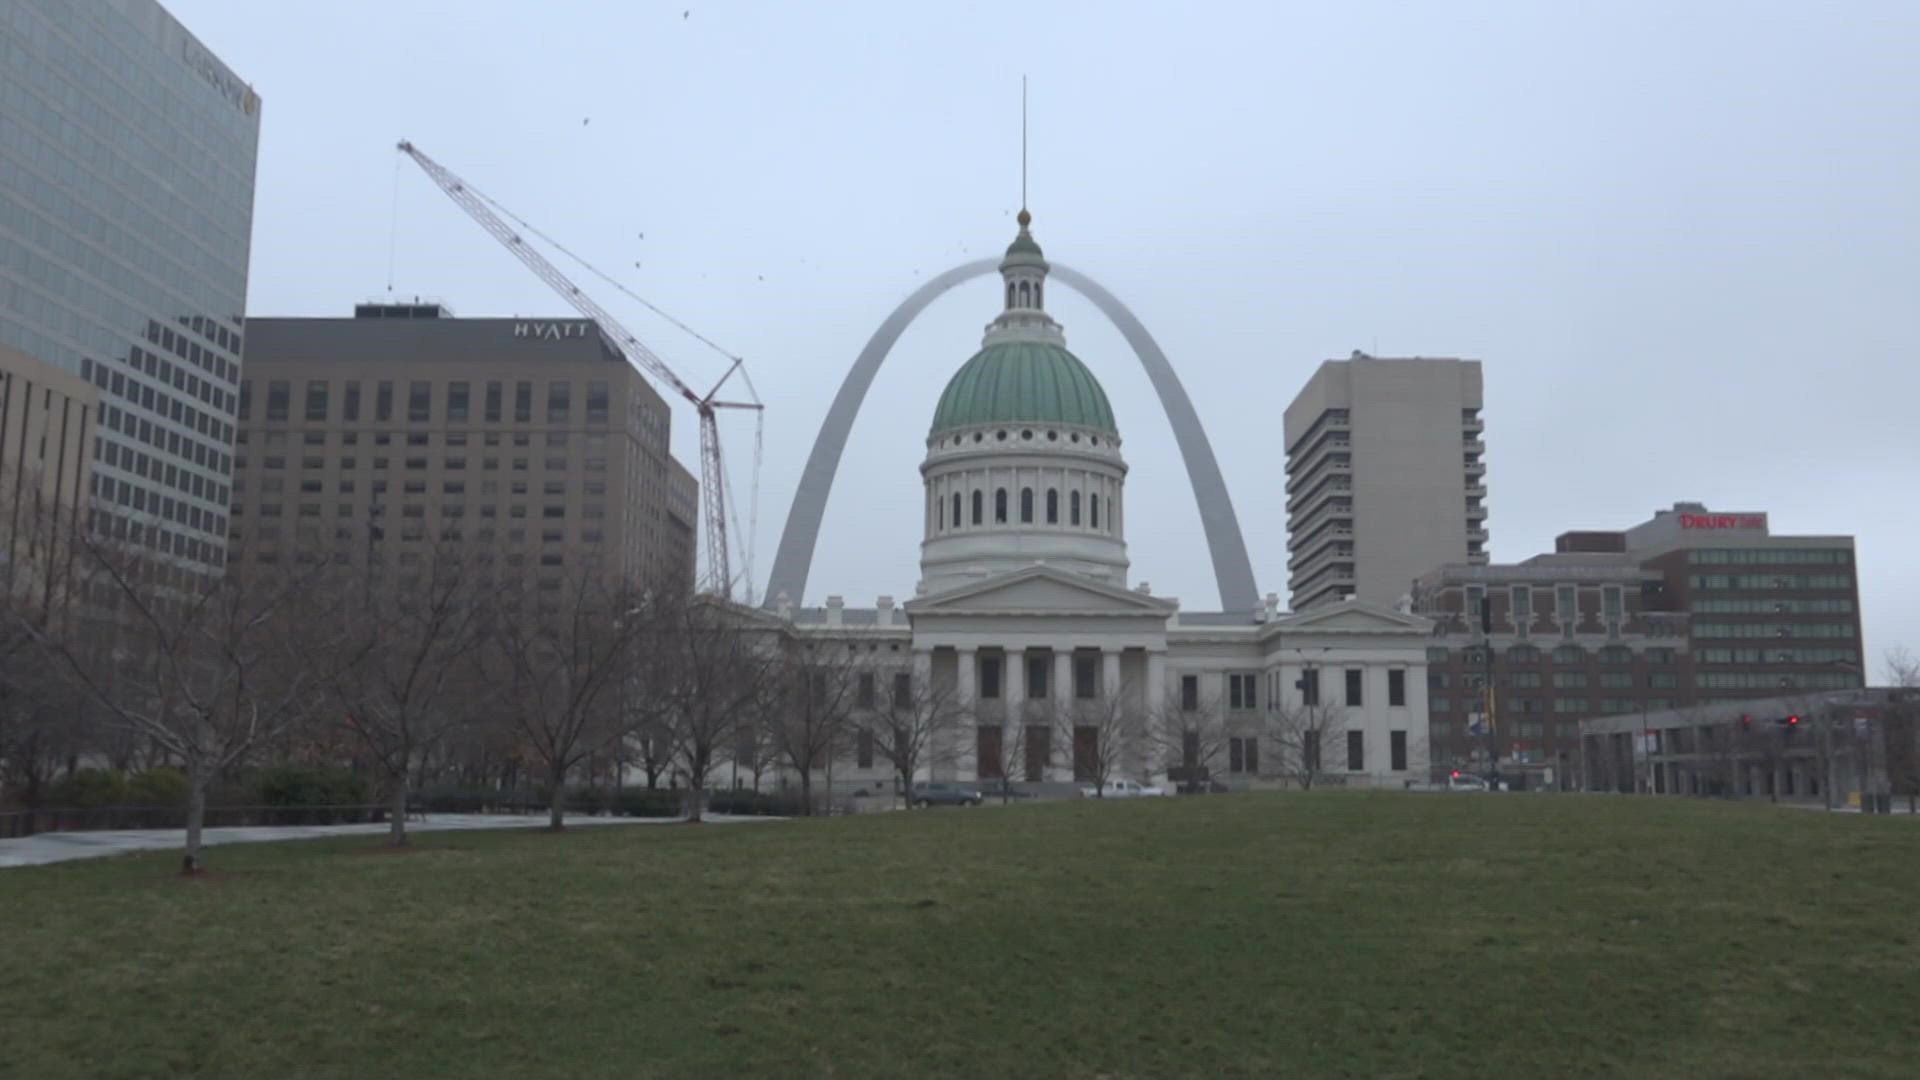 Gateway Arch National Park superintendent believes this is the only second major renovation since the building was constructed.